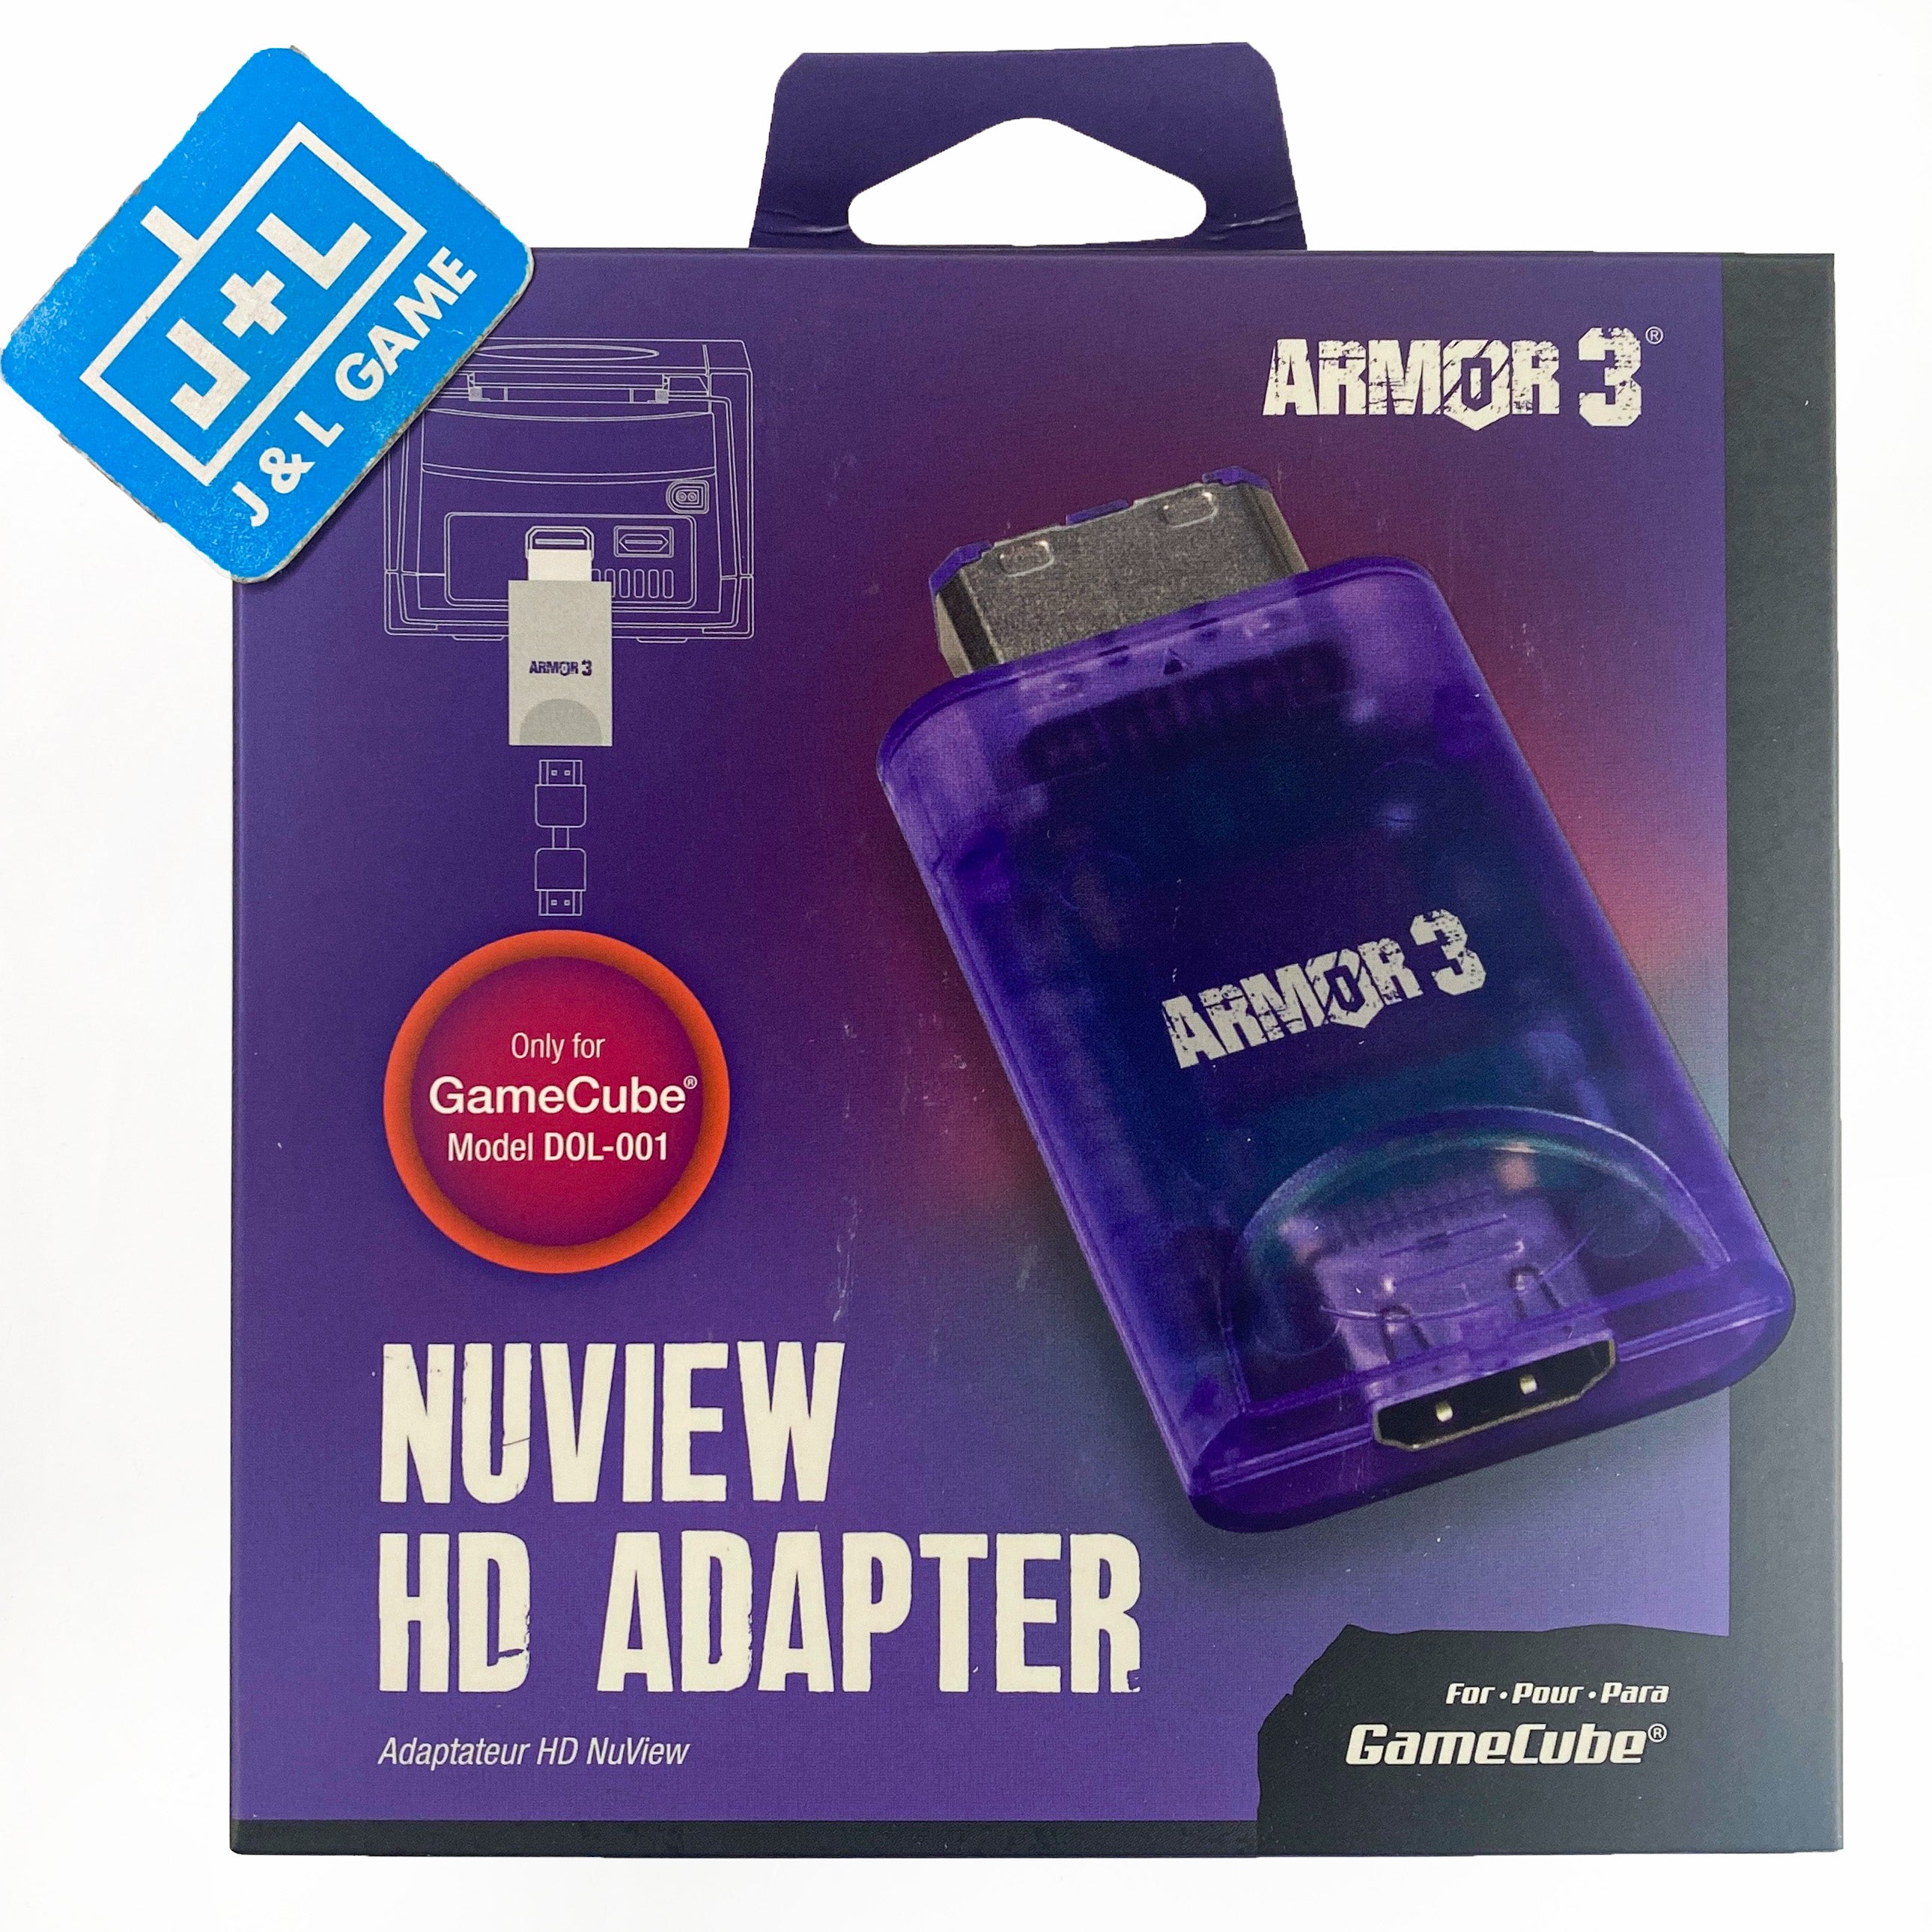 Armor3 "NuView" HD Adapter - (GC) GameCube Accessories Armor3   